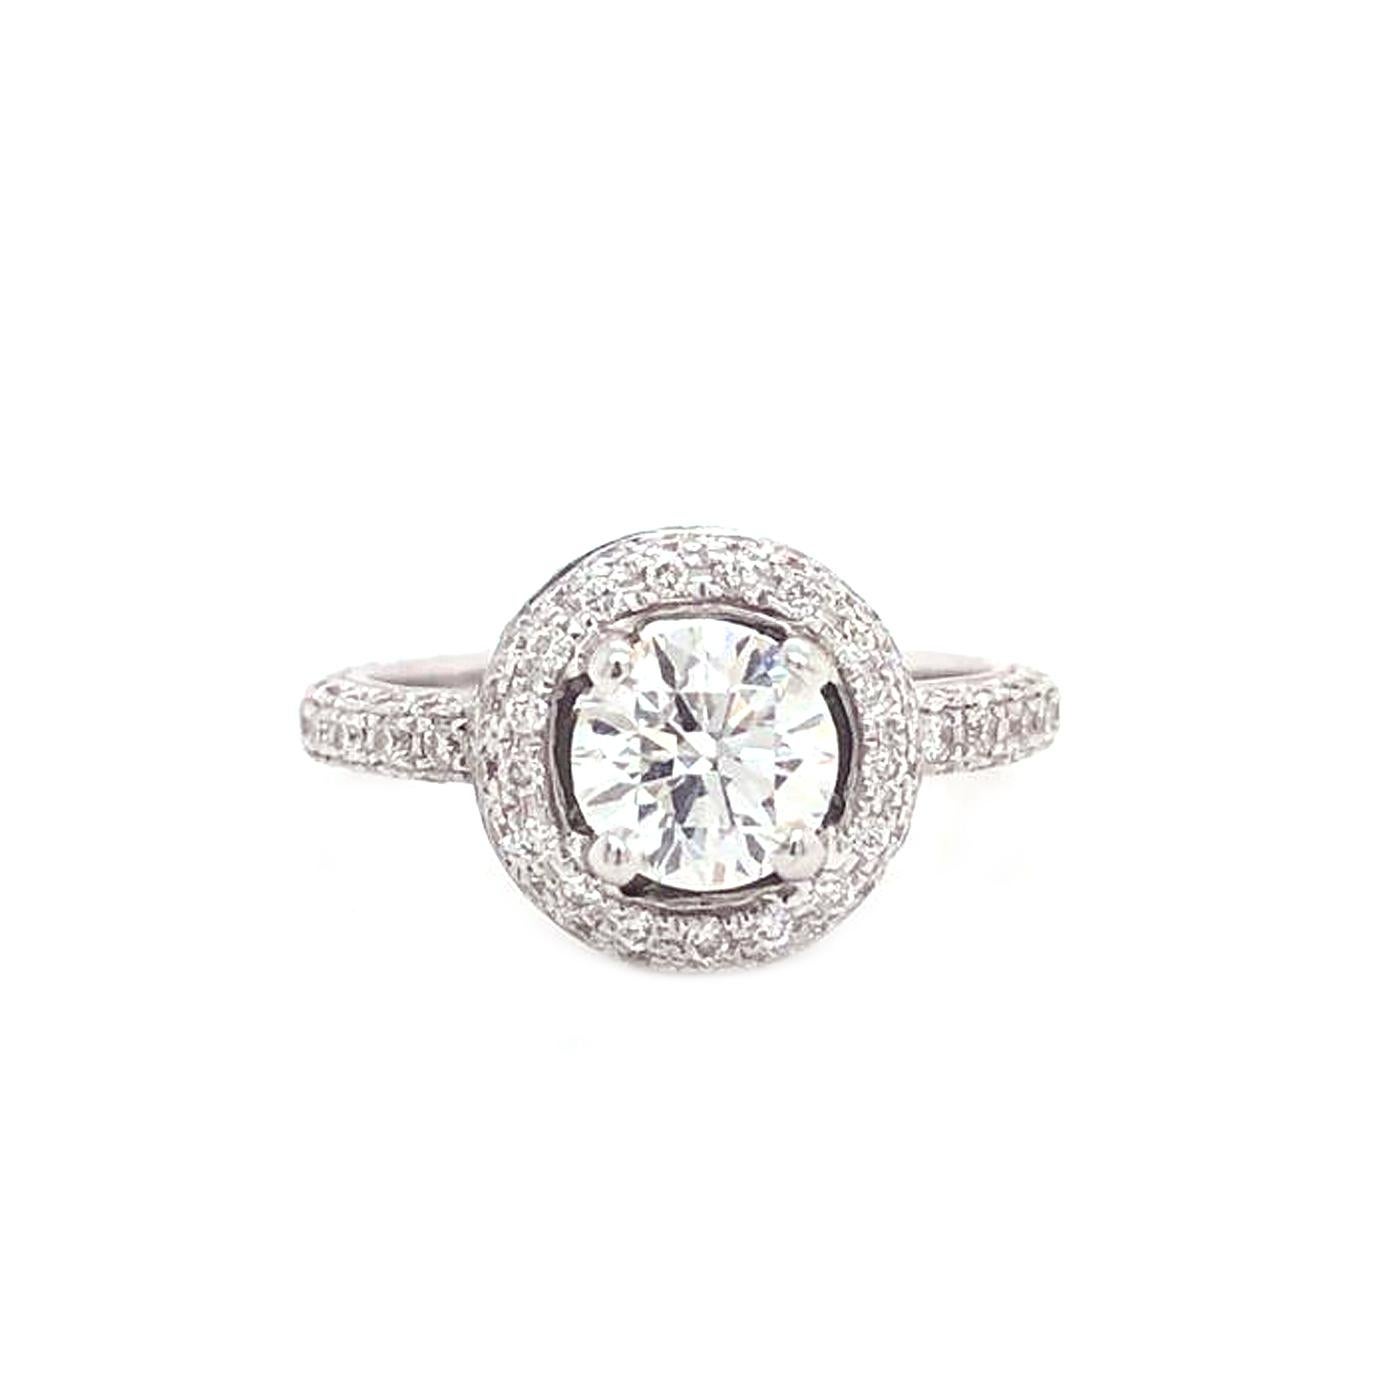 Delicate in design, This extraordinary ring is handcrafted using traditional techniques for exceptional quality. The ring features a GIA certified 1.01 carat round diamond surrounded by a double halo of diamonds on a diamond pave band. This women's